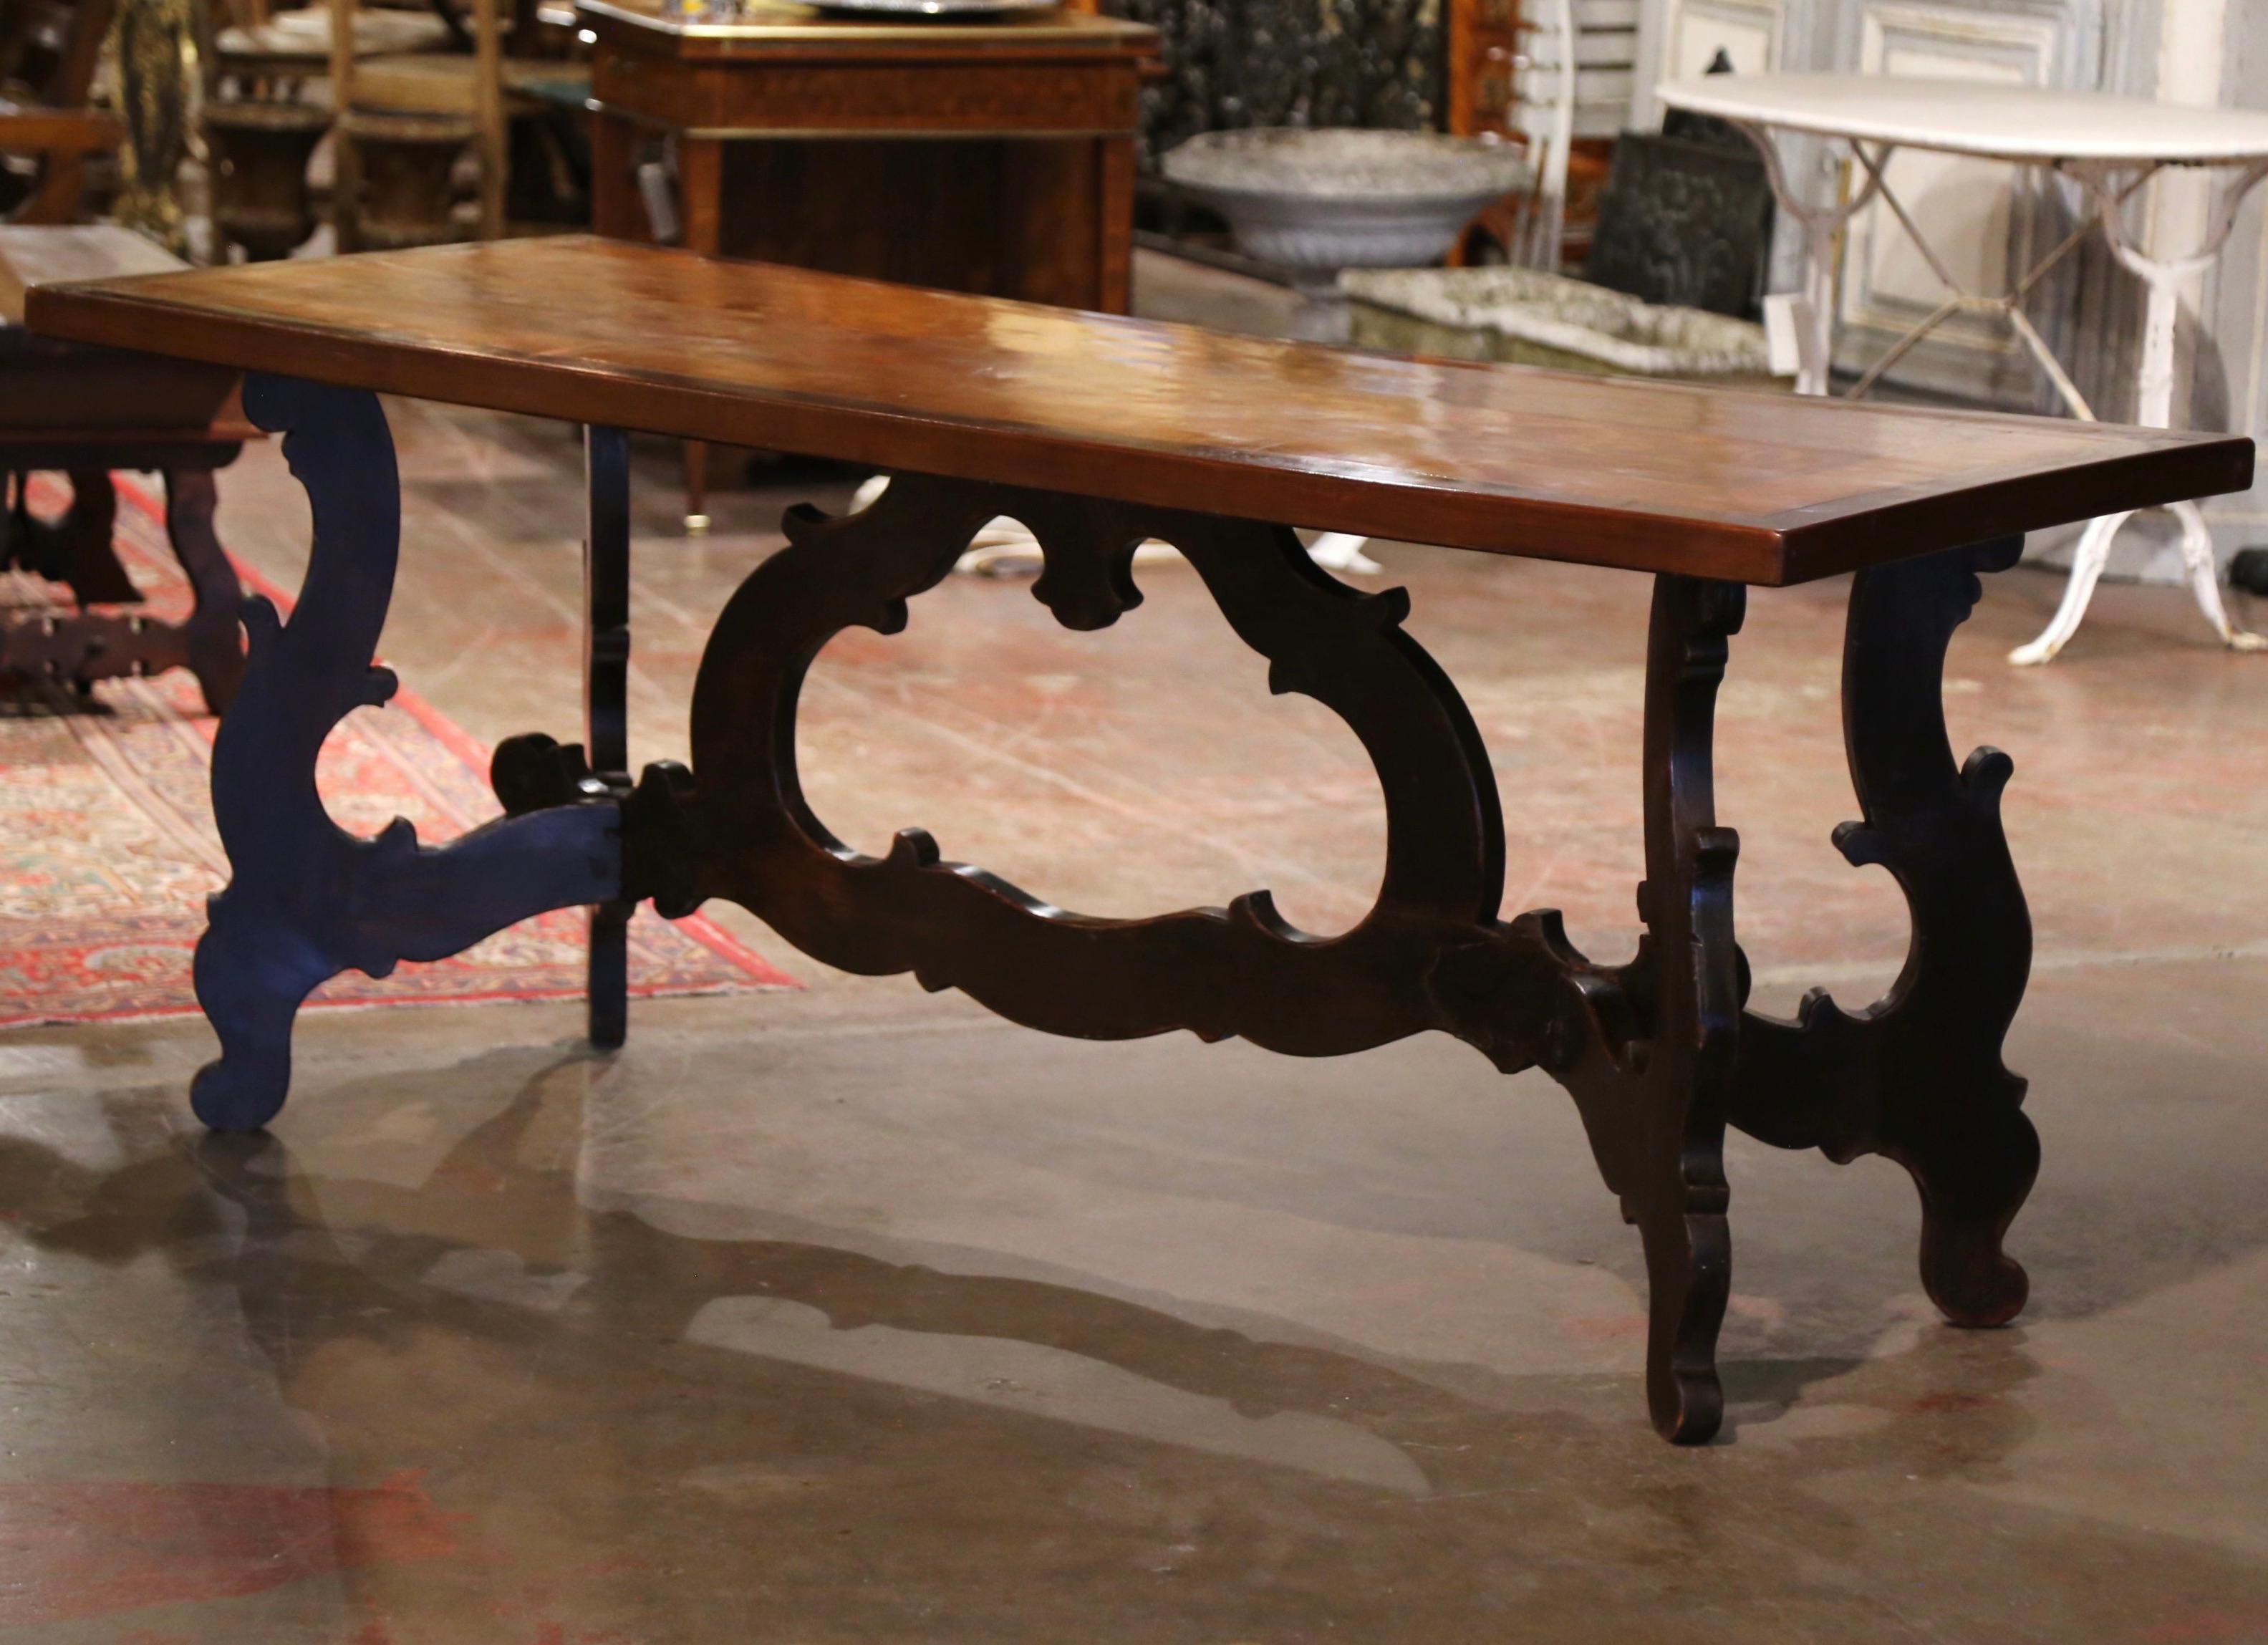 This elegant, antique fruit wood dining room table was crafted in Italy, circa 1830. The intricate table features a solid top made from a single walnut plank and embellished with scrolling foliate marquetry and a decorative inlay cherry band around